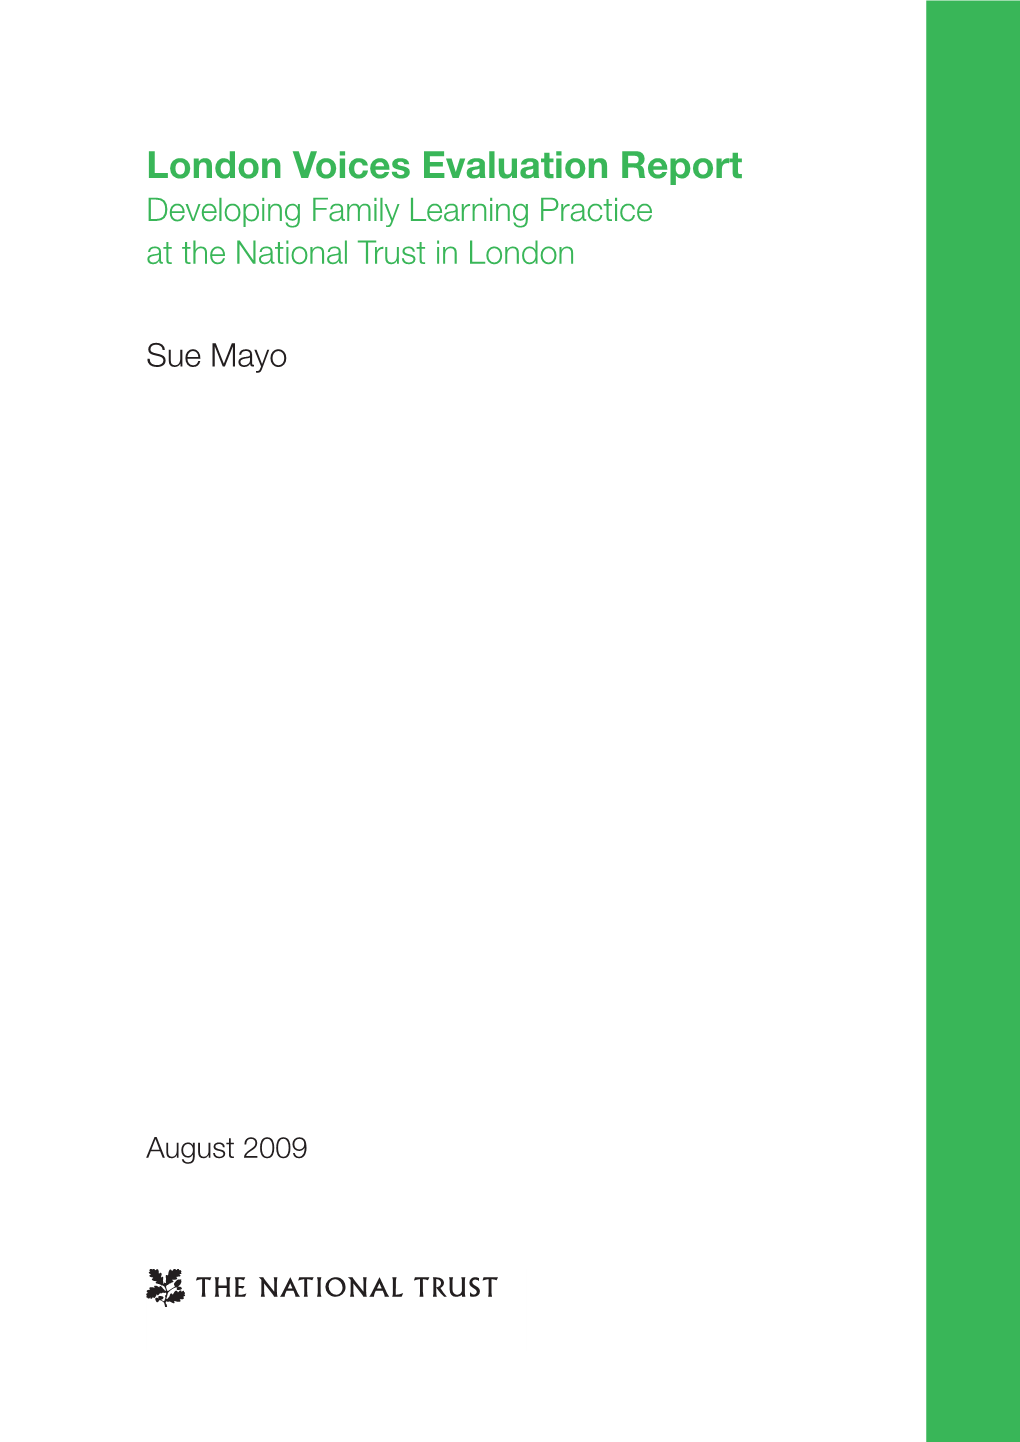 London Voices Evaluation Report Developing Family Learning Practice at the National Trust in London